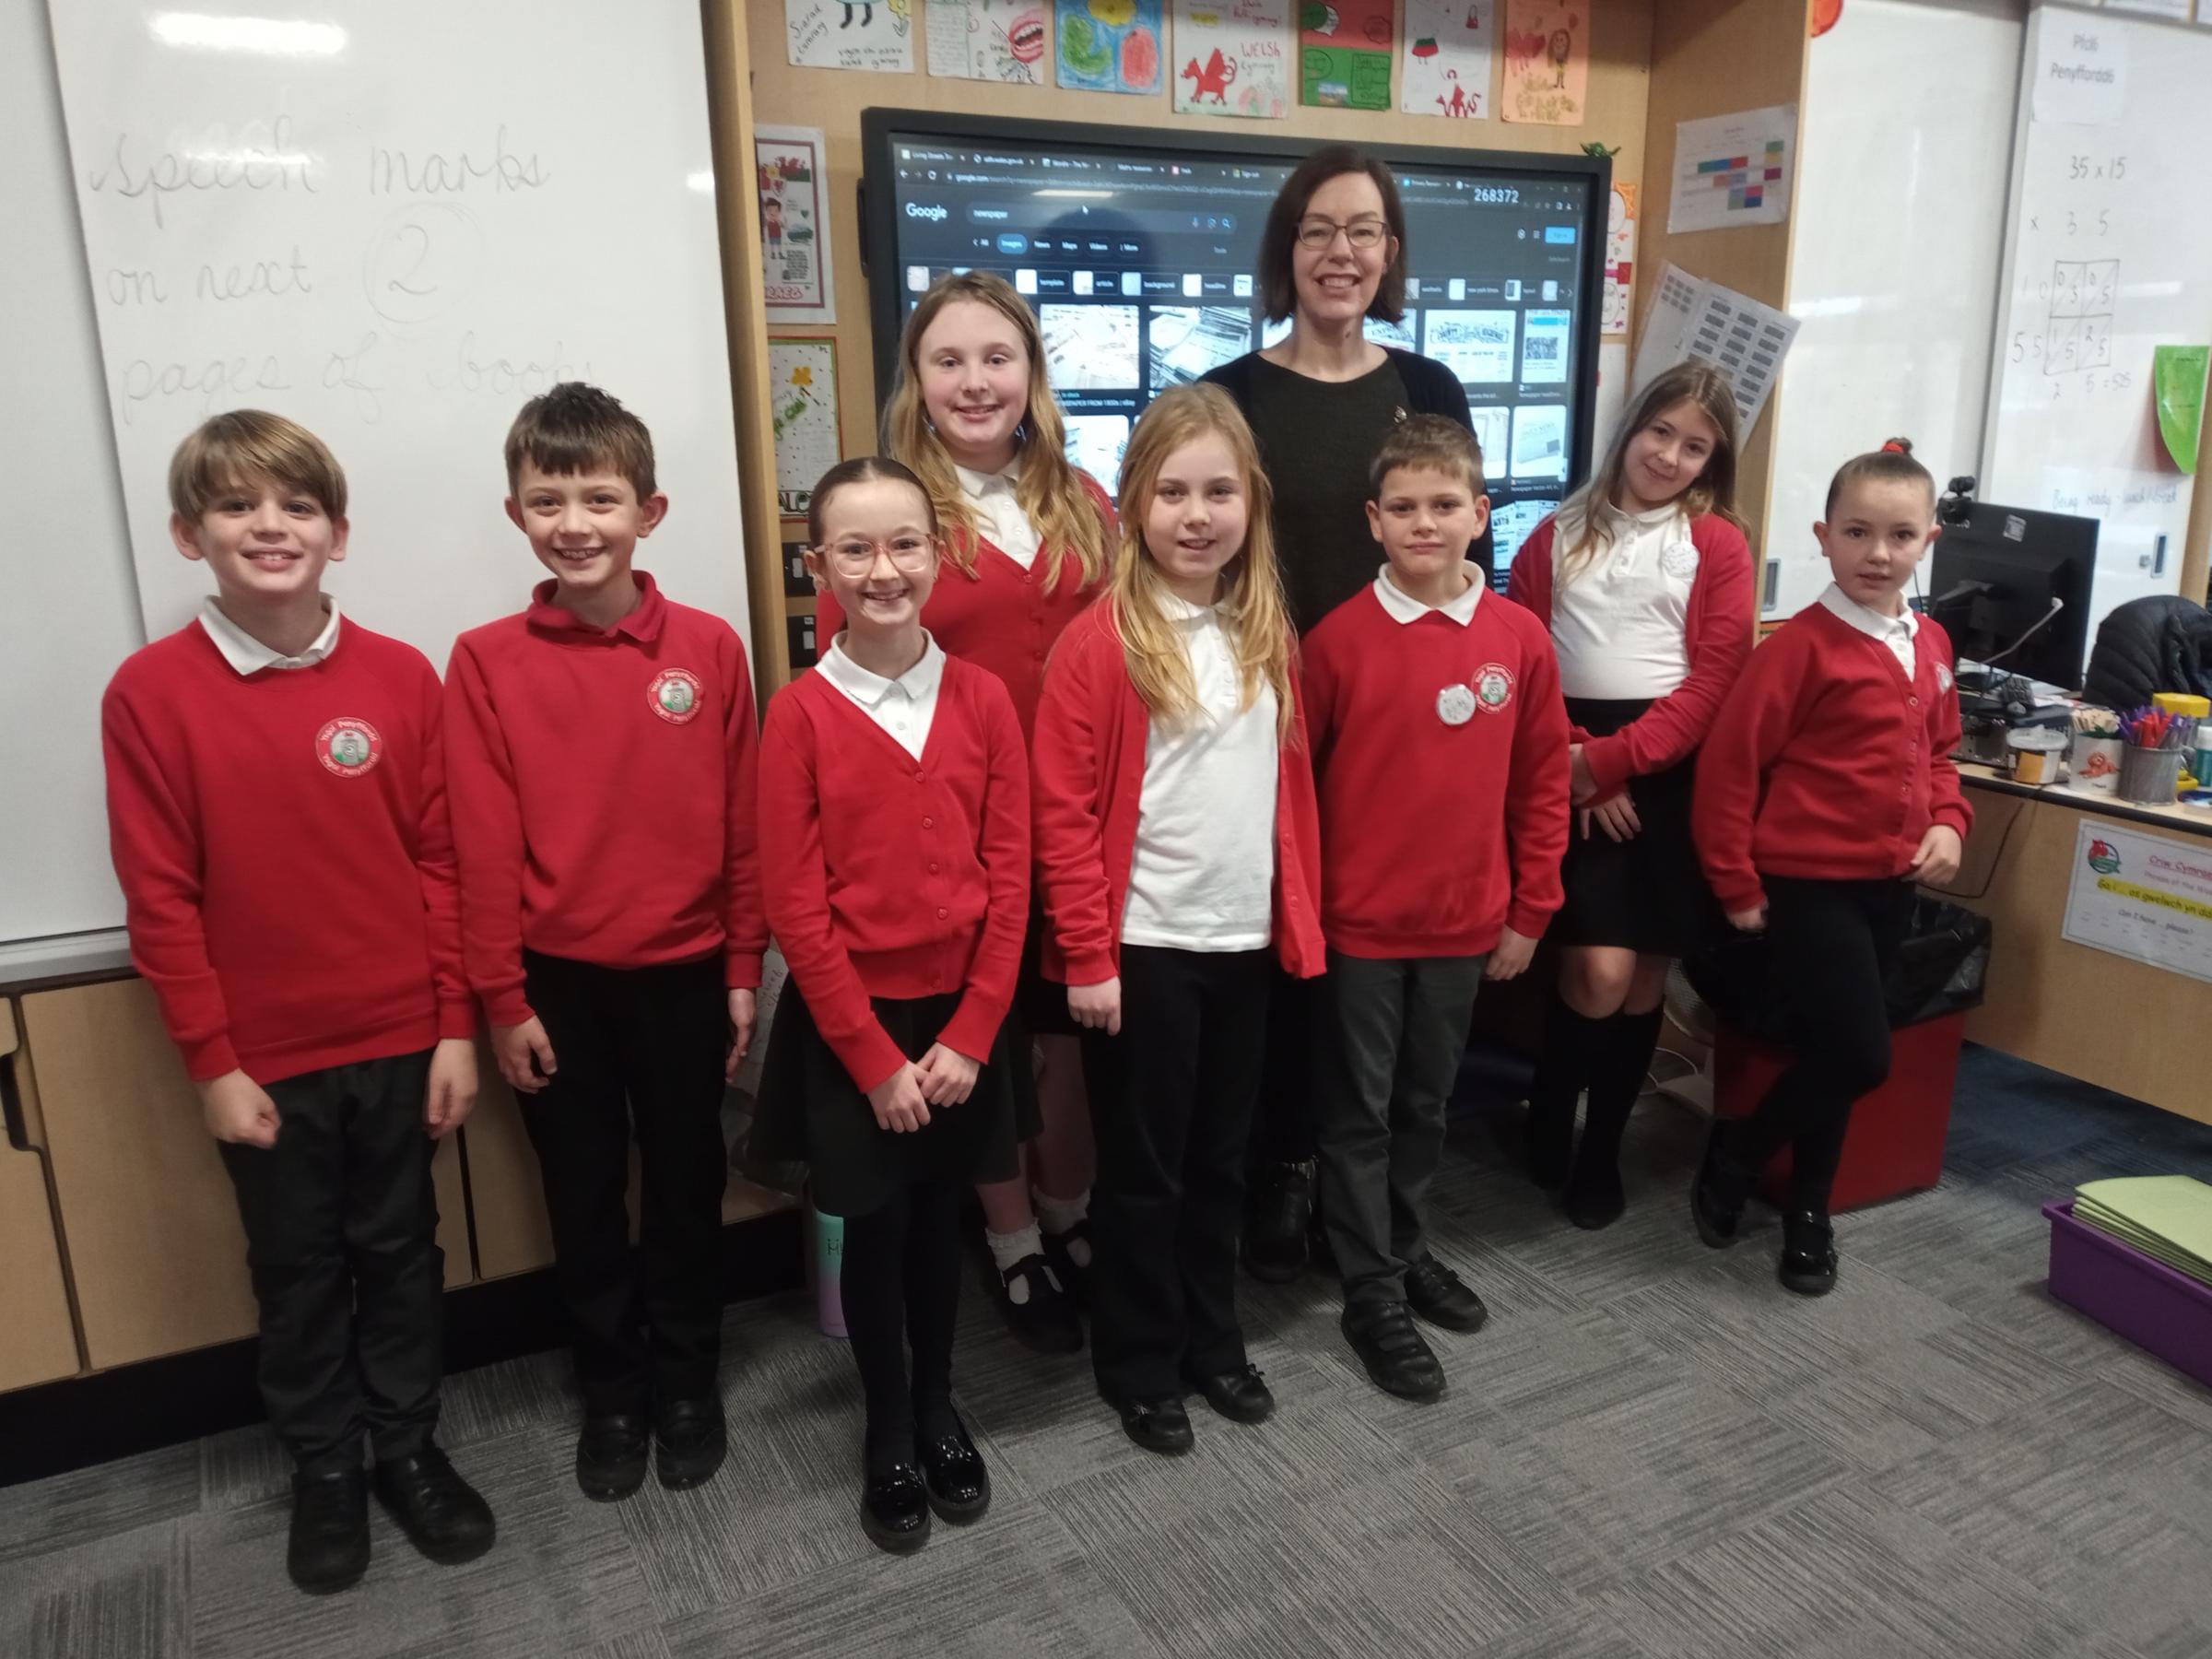 Leader community content editor Claire Pierce, with some of the Ysgol Penyffordd pupils.